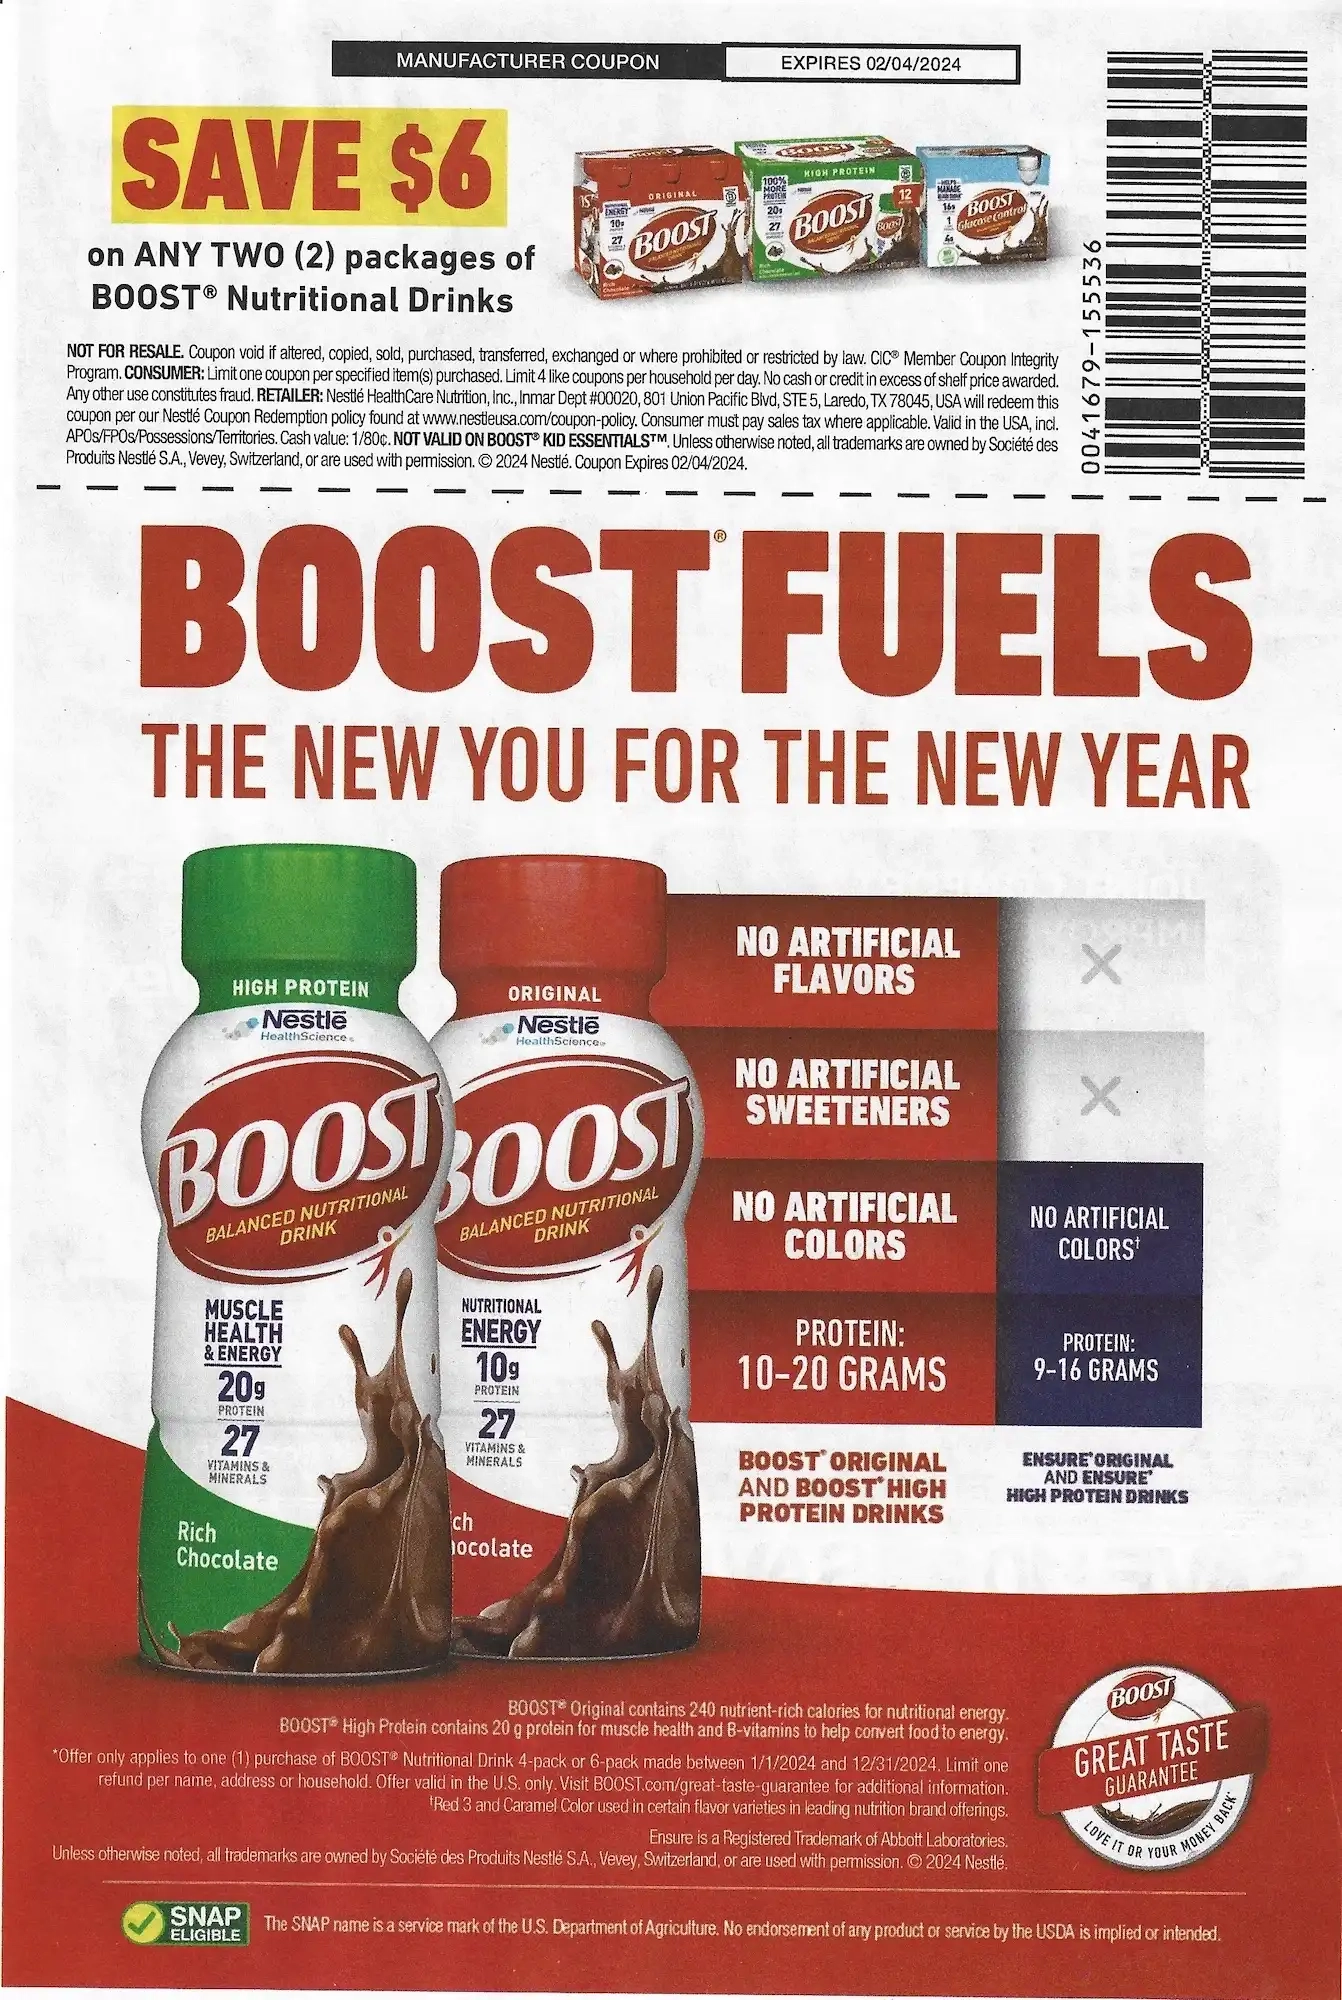 Save.Com Weekly Mailer Coupons - 01/07/2024 Boost